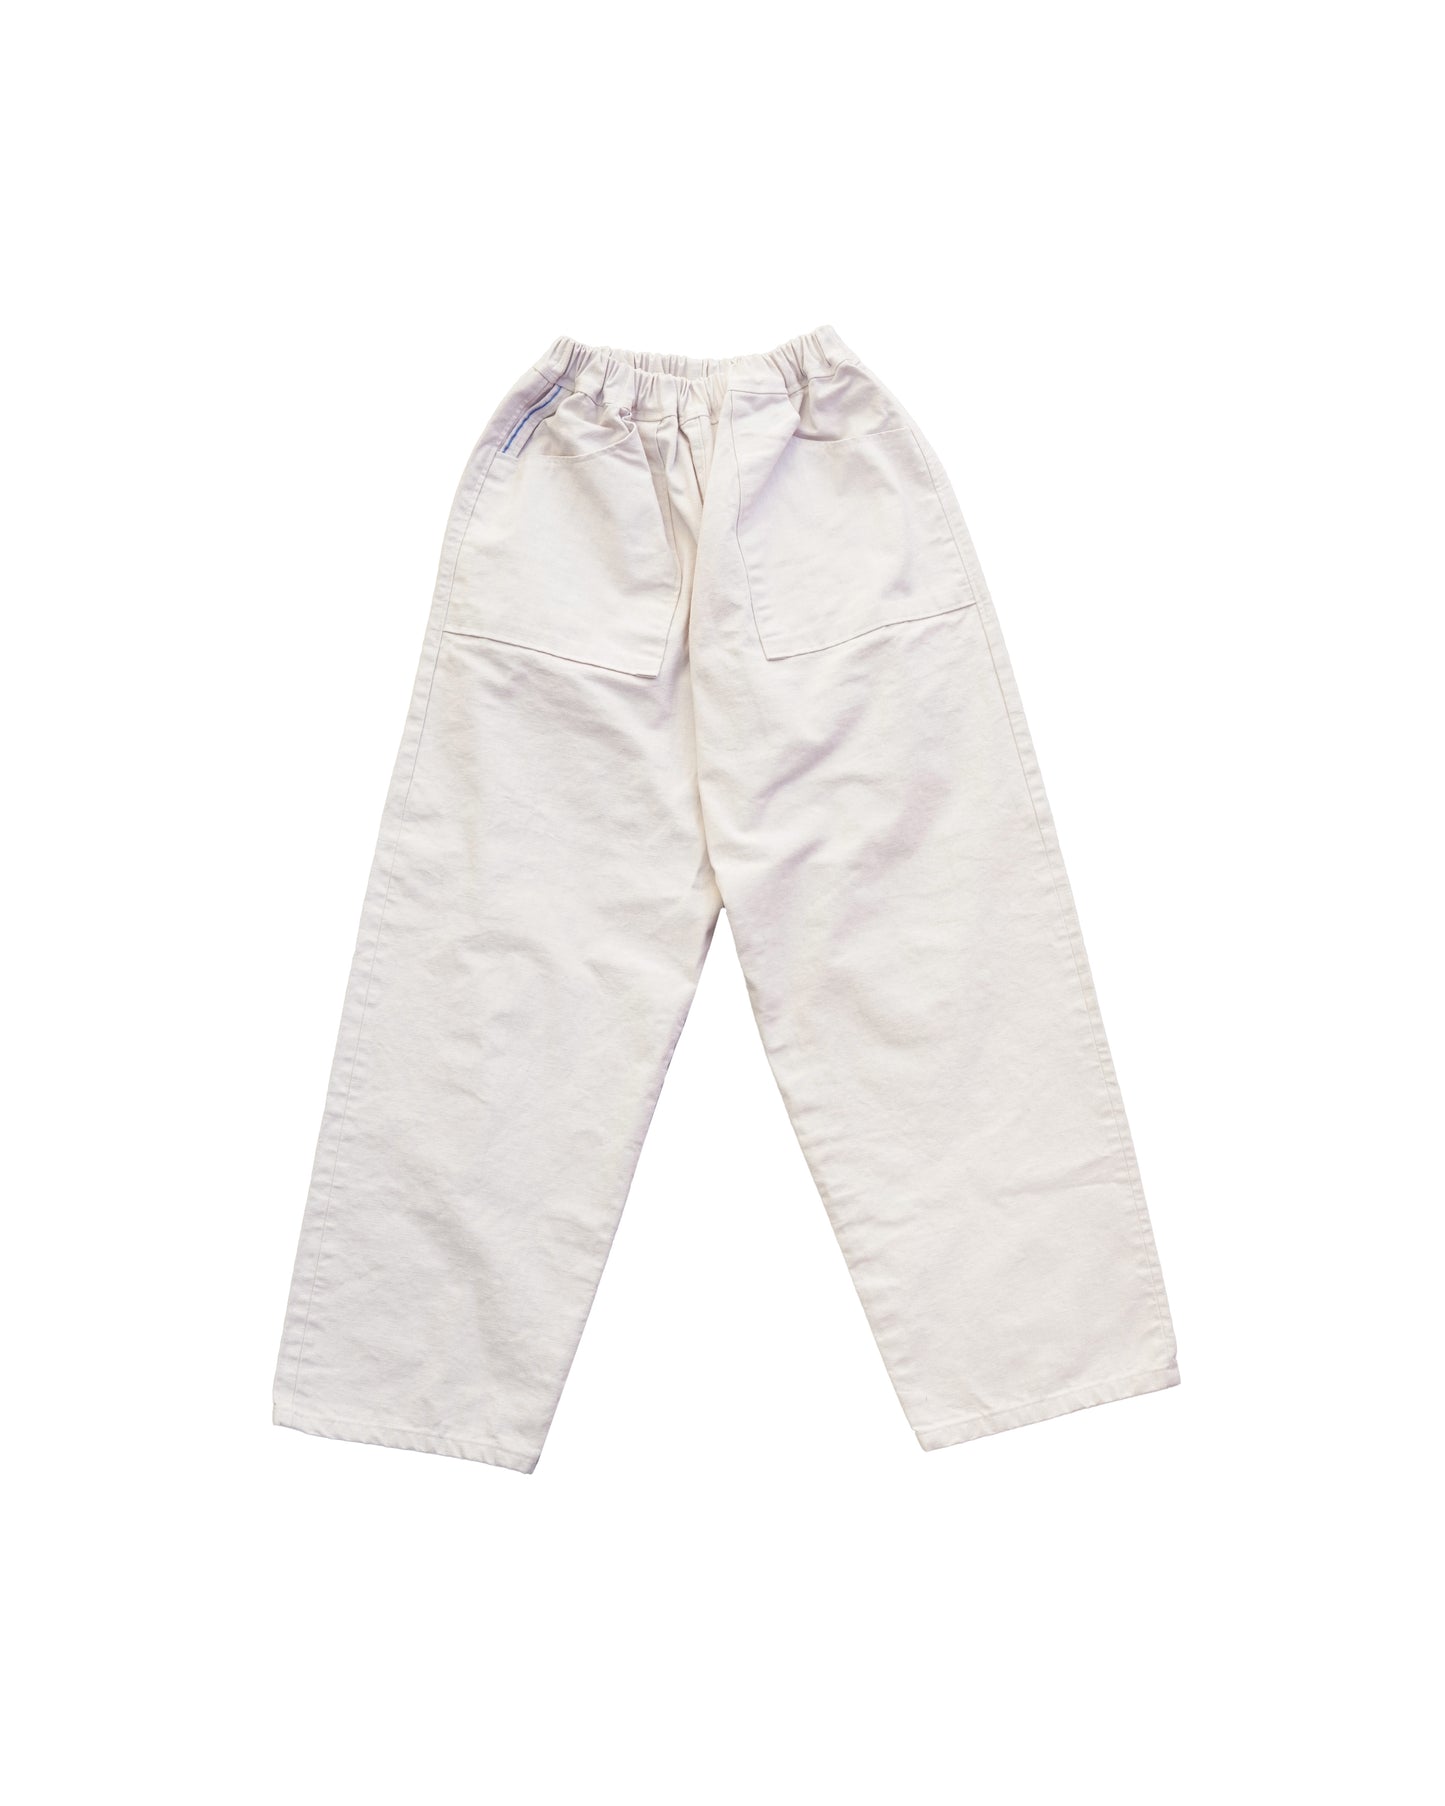 1/1 Off-White Selvedge Canvas Pant